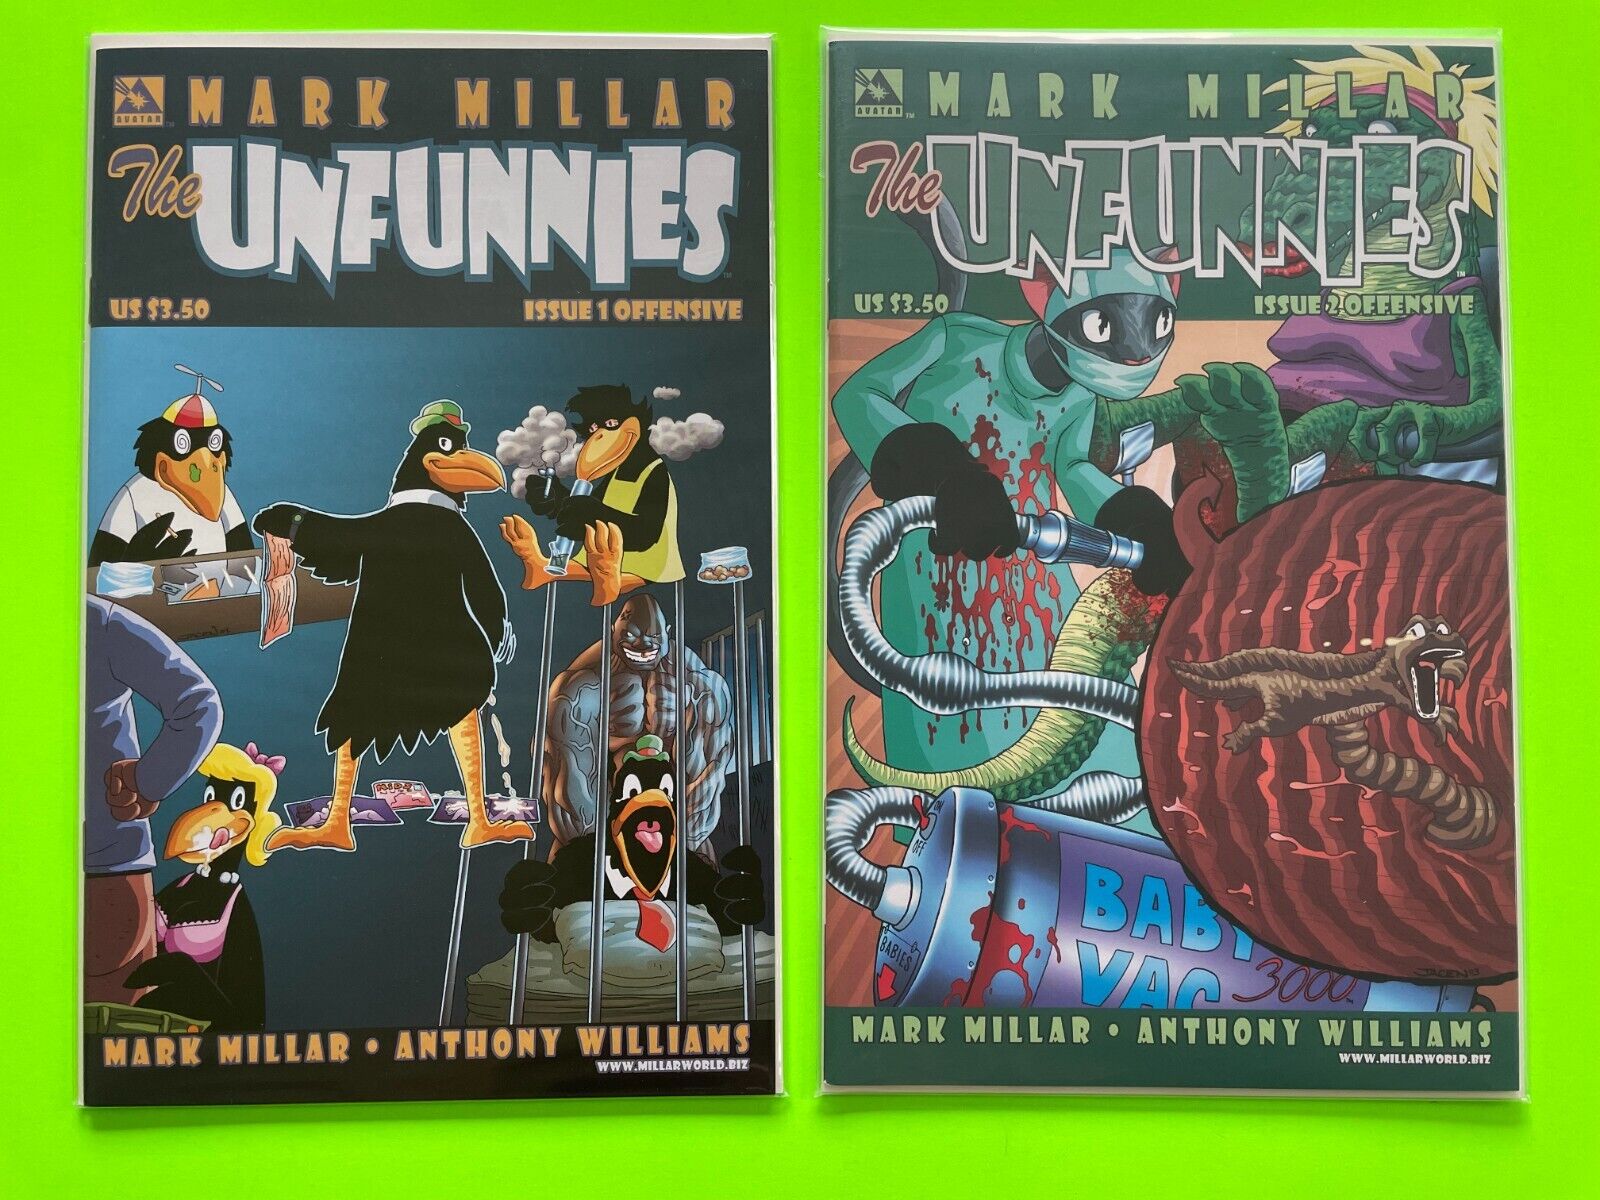 The Unfunnies #1 and 2 (Offensive)(Avatar, 2004) Mark Millar Adults Only, Mature